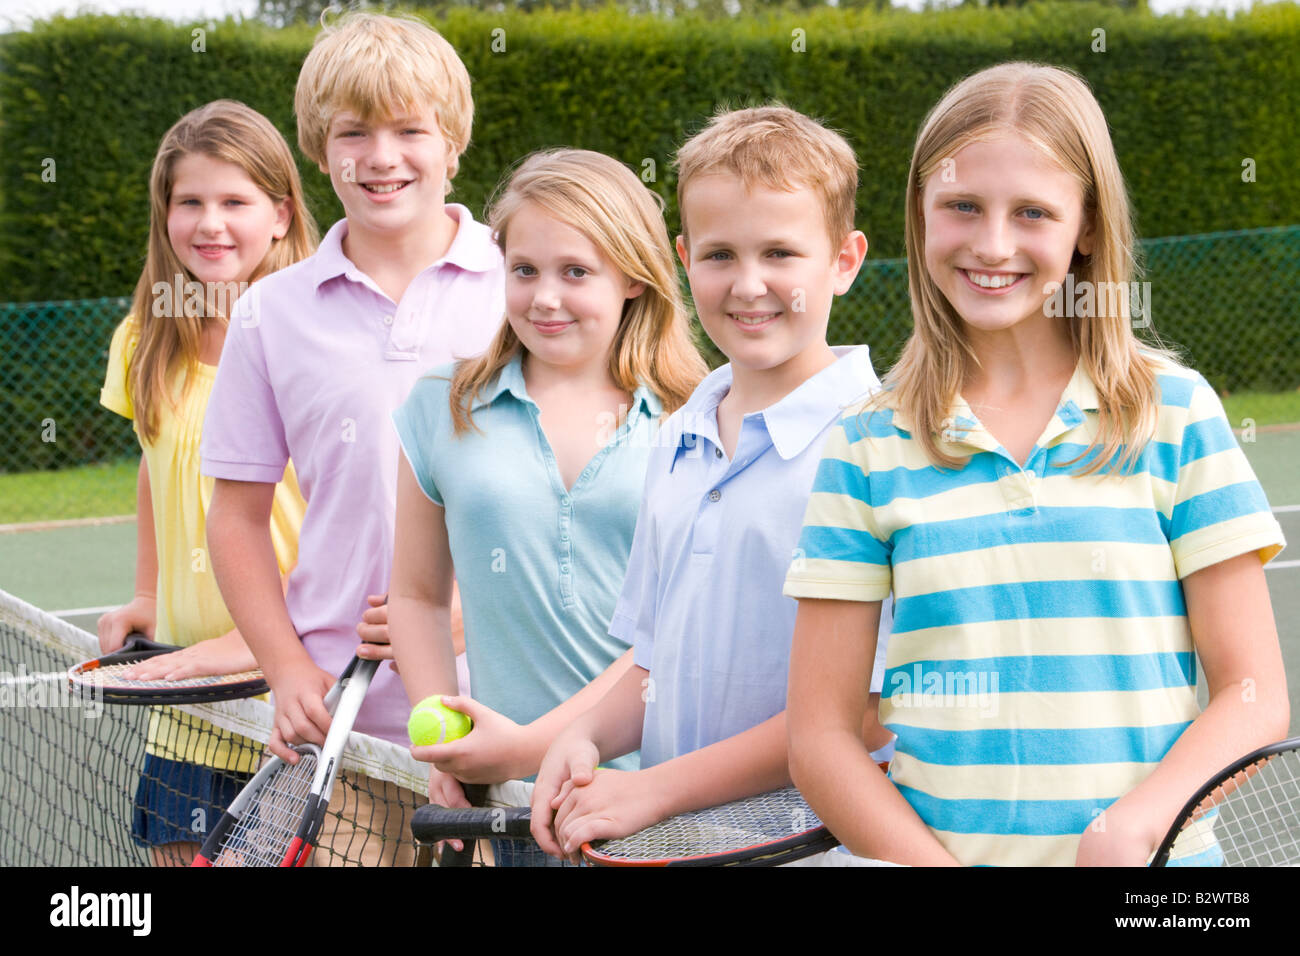 Five young friends with rackets on tennis court smiling Stock Photo